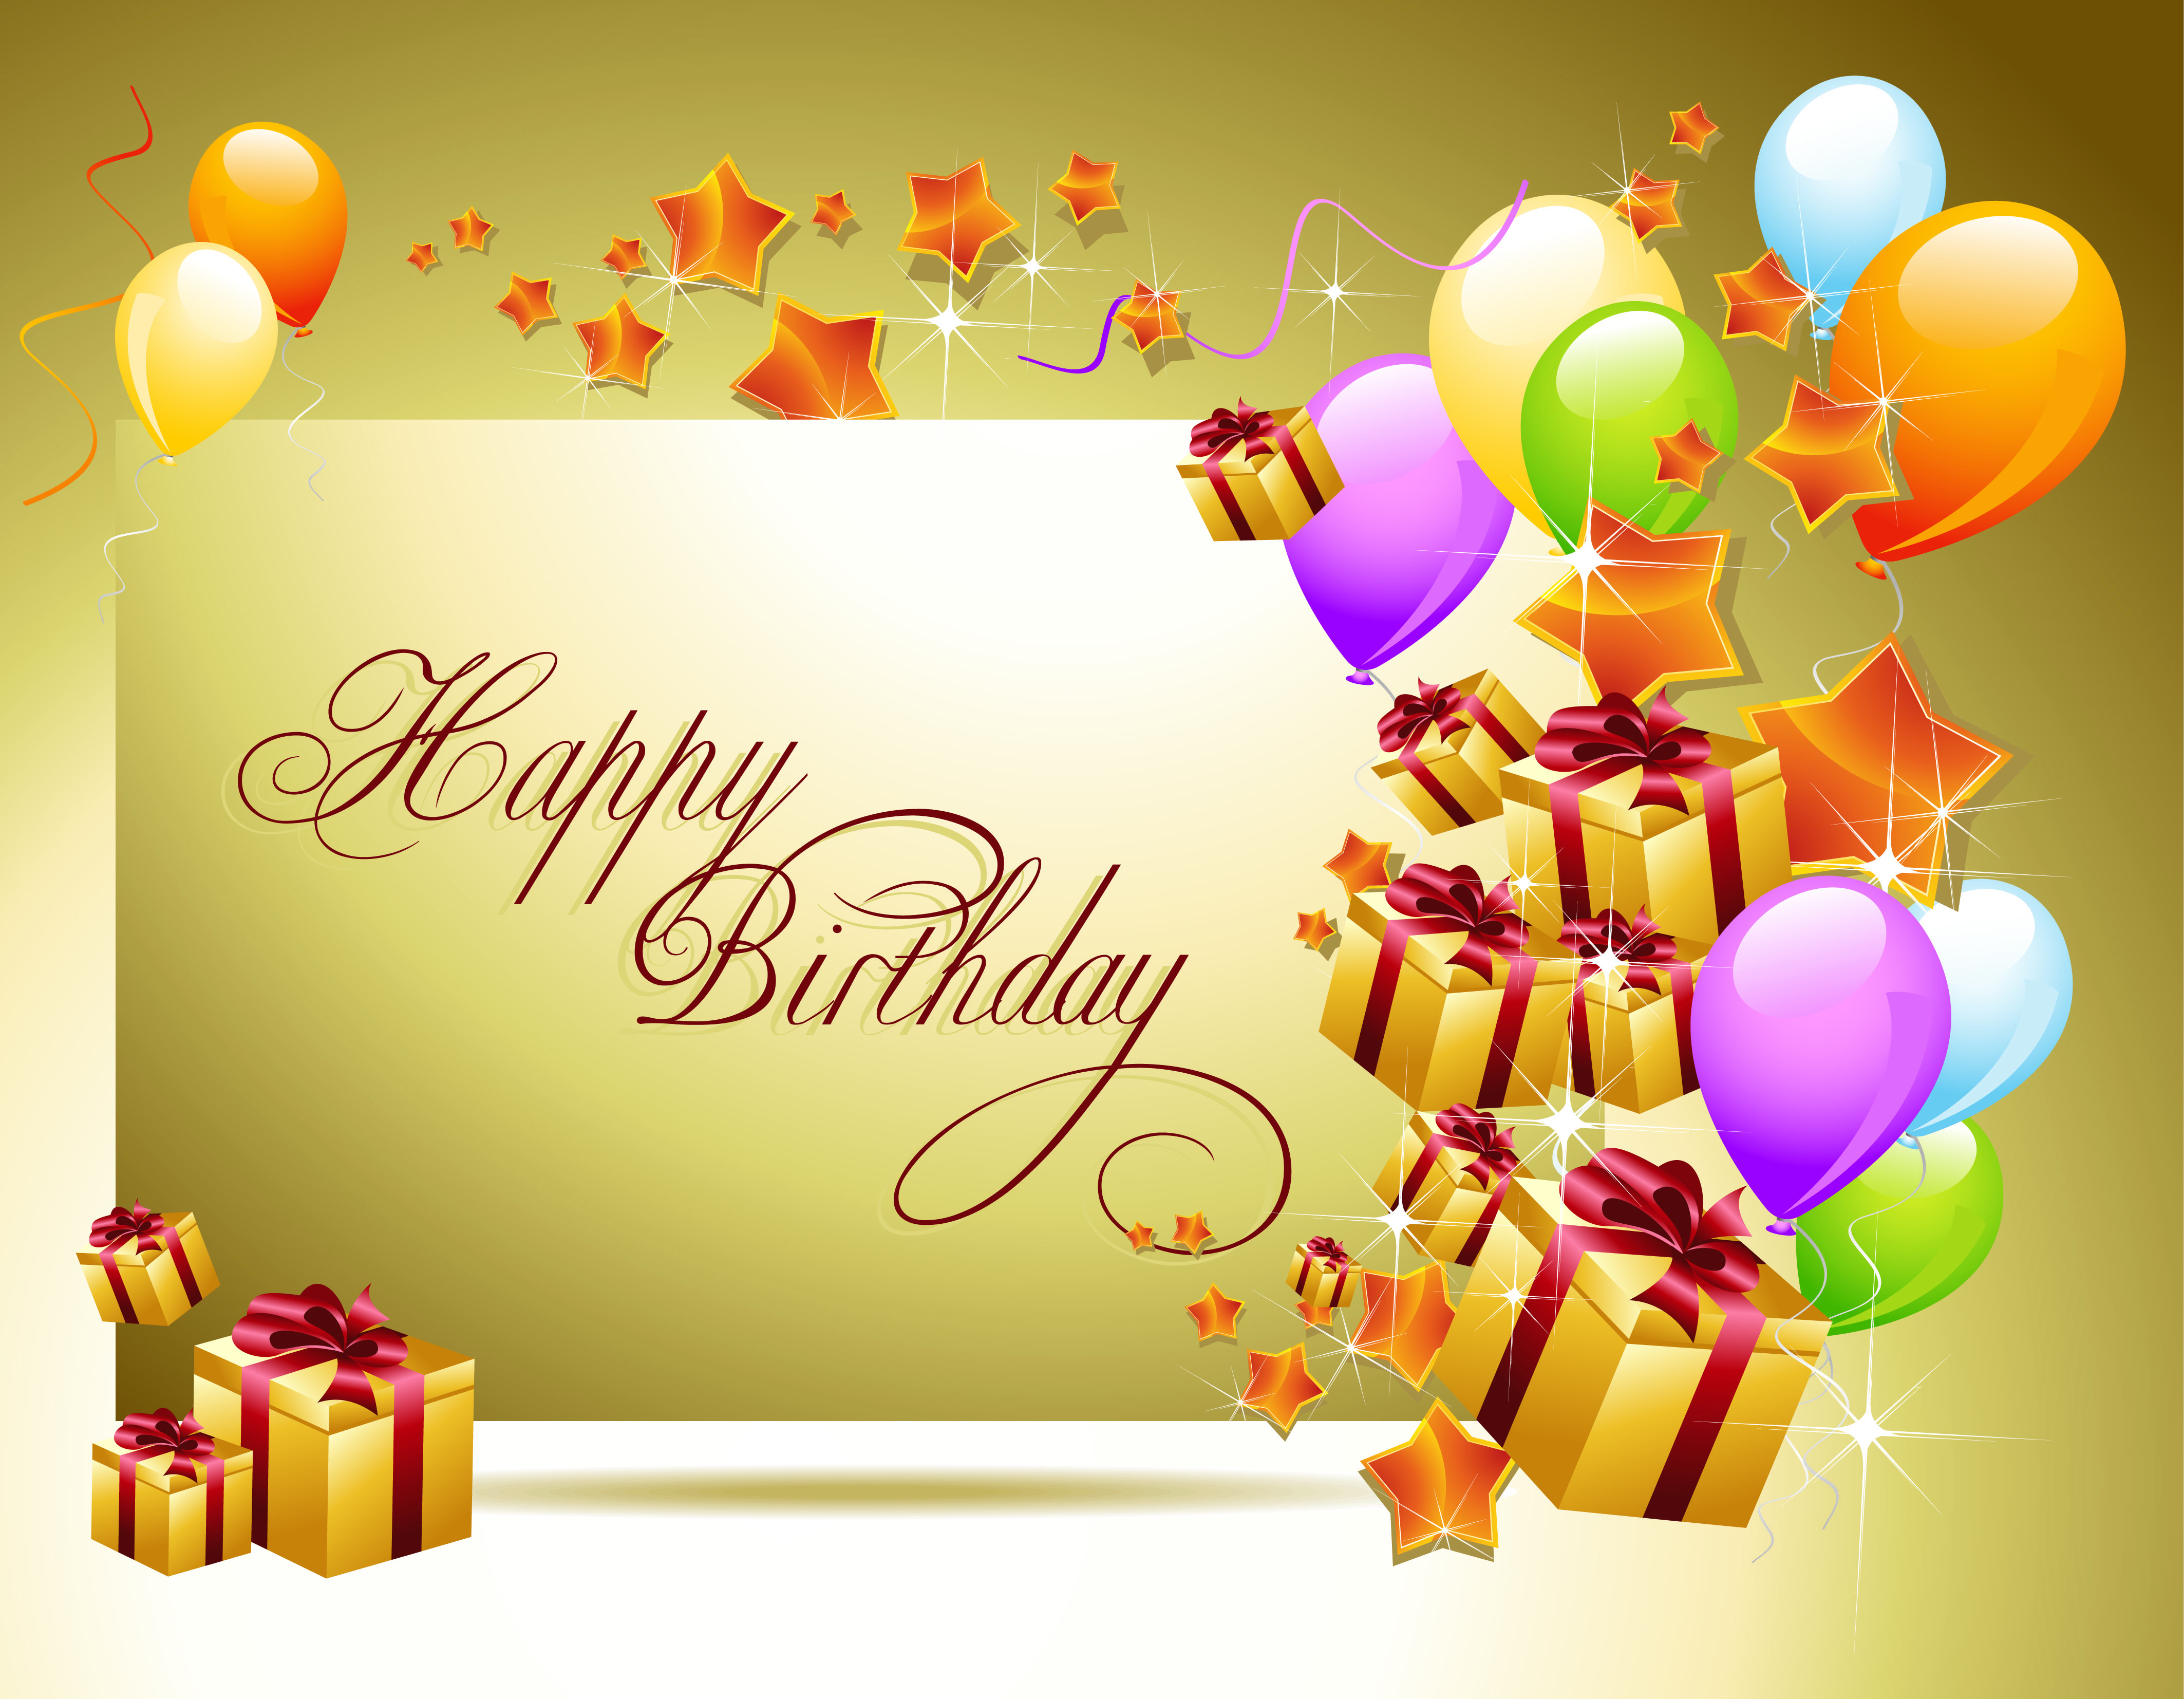 Congratulations on the birthday golden background wallpapers and 4252x3307